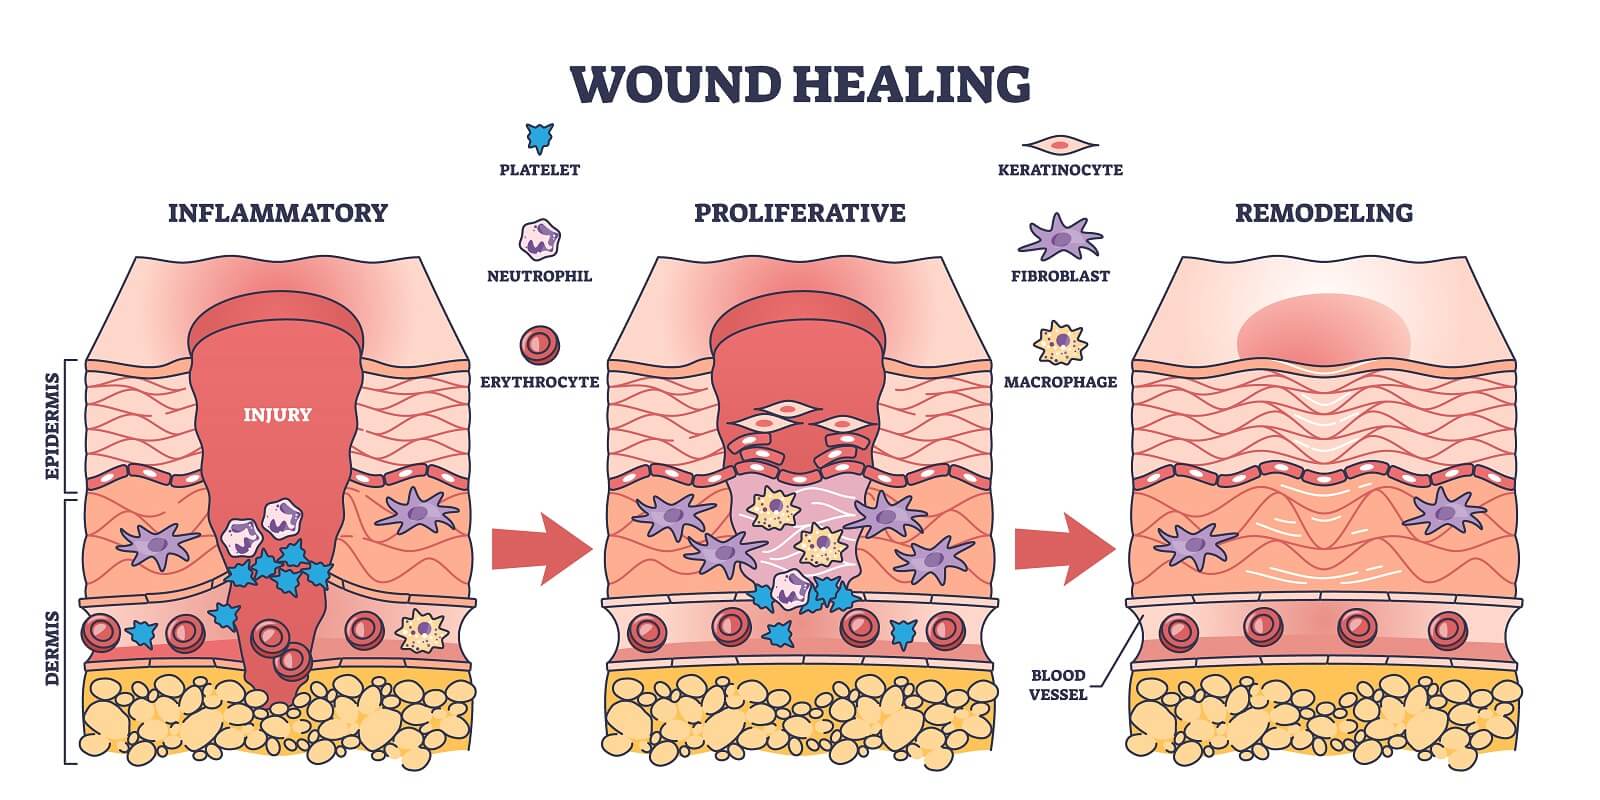 Process of wound healing and anatomical body injury repair outline diagram. Labeled educational scheme with medical epidermis skin inflammatory, proliferative, and remodeling stages.